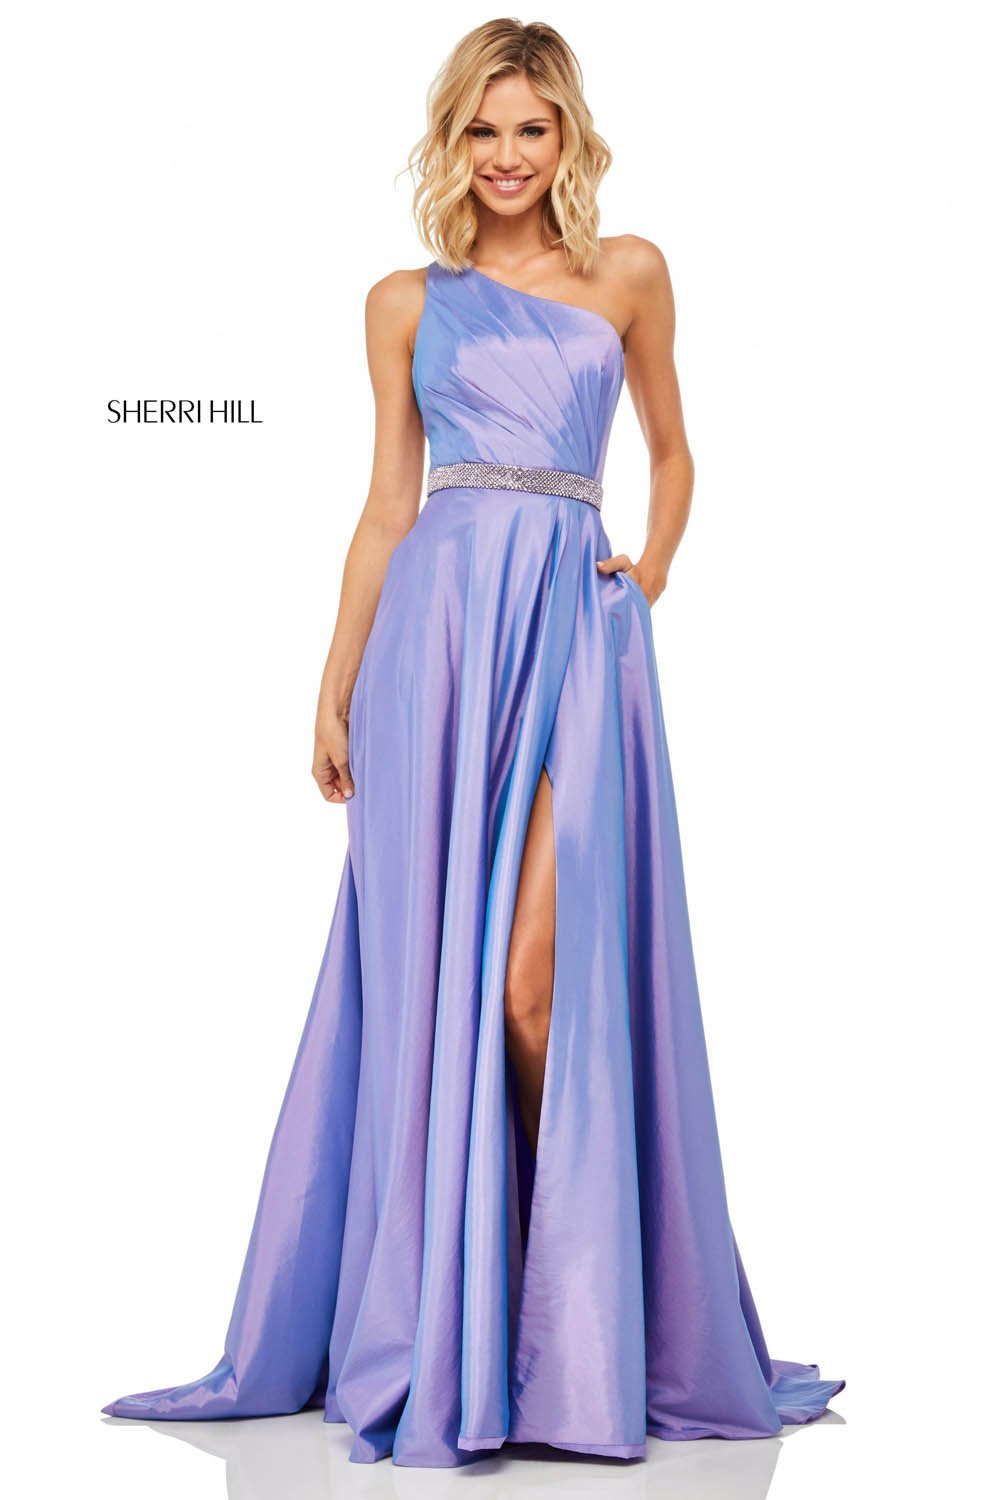 Sherri Hill 52838 dress images in these colors: Fuchsia, Berry, Light Blue, Royal, Navy, Red, Lilac.